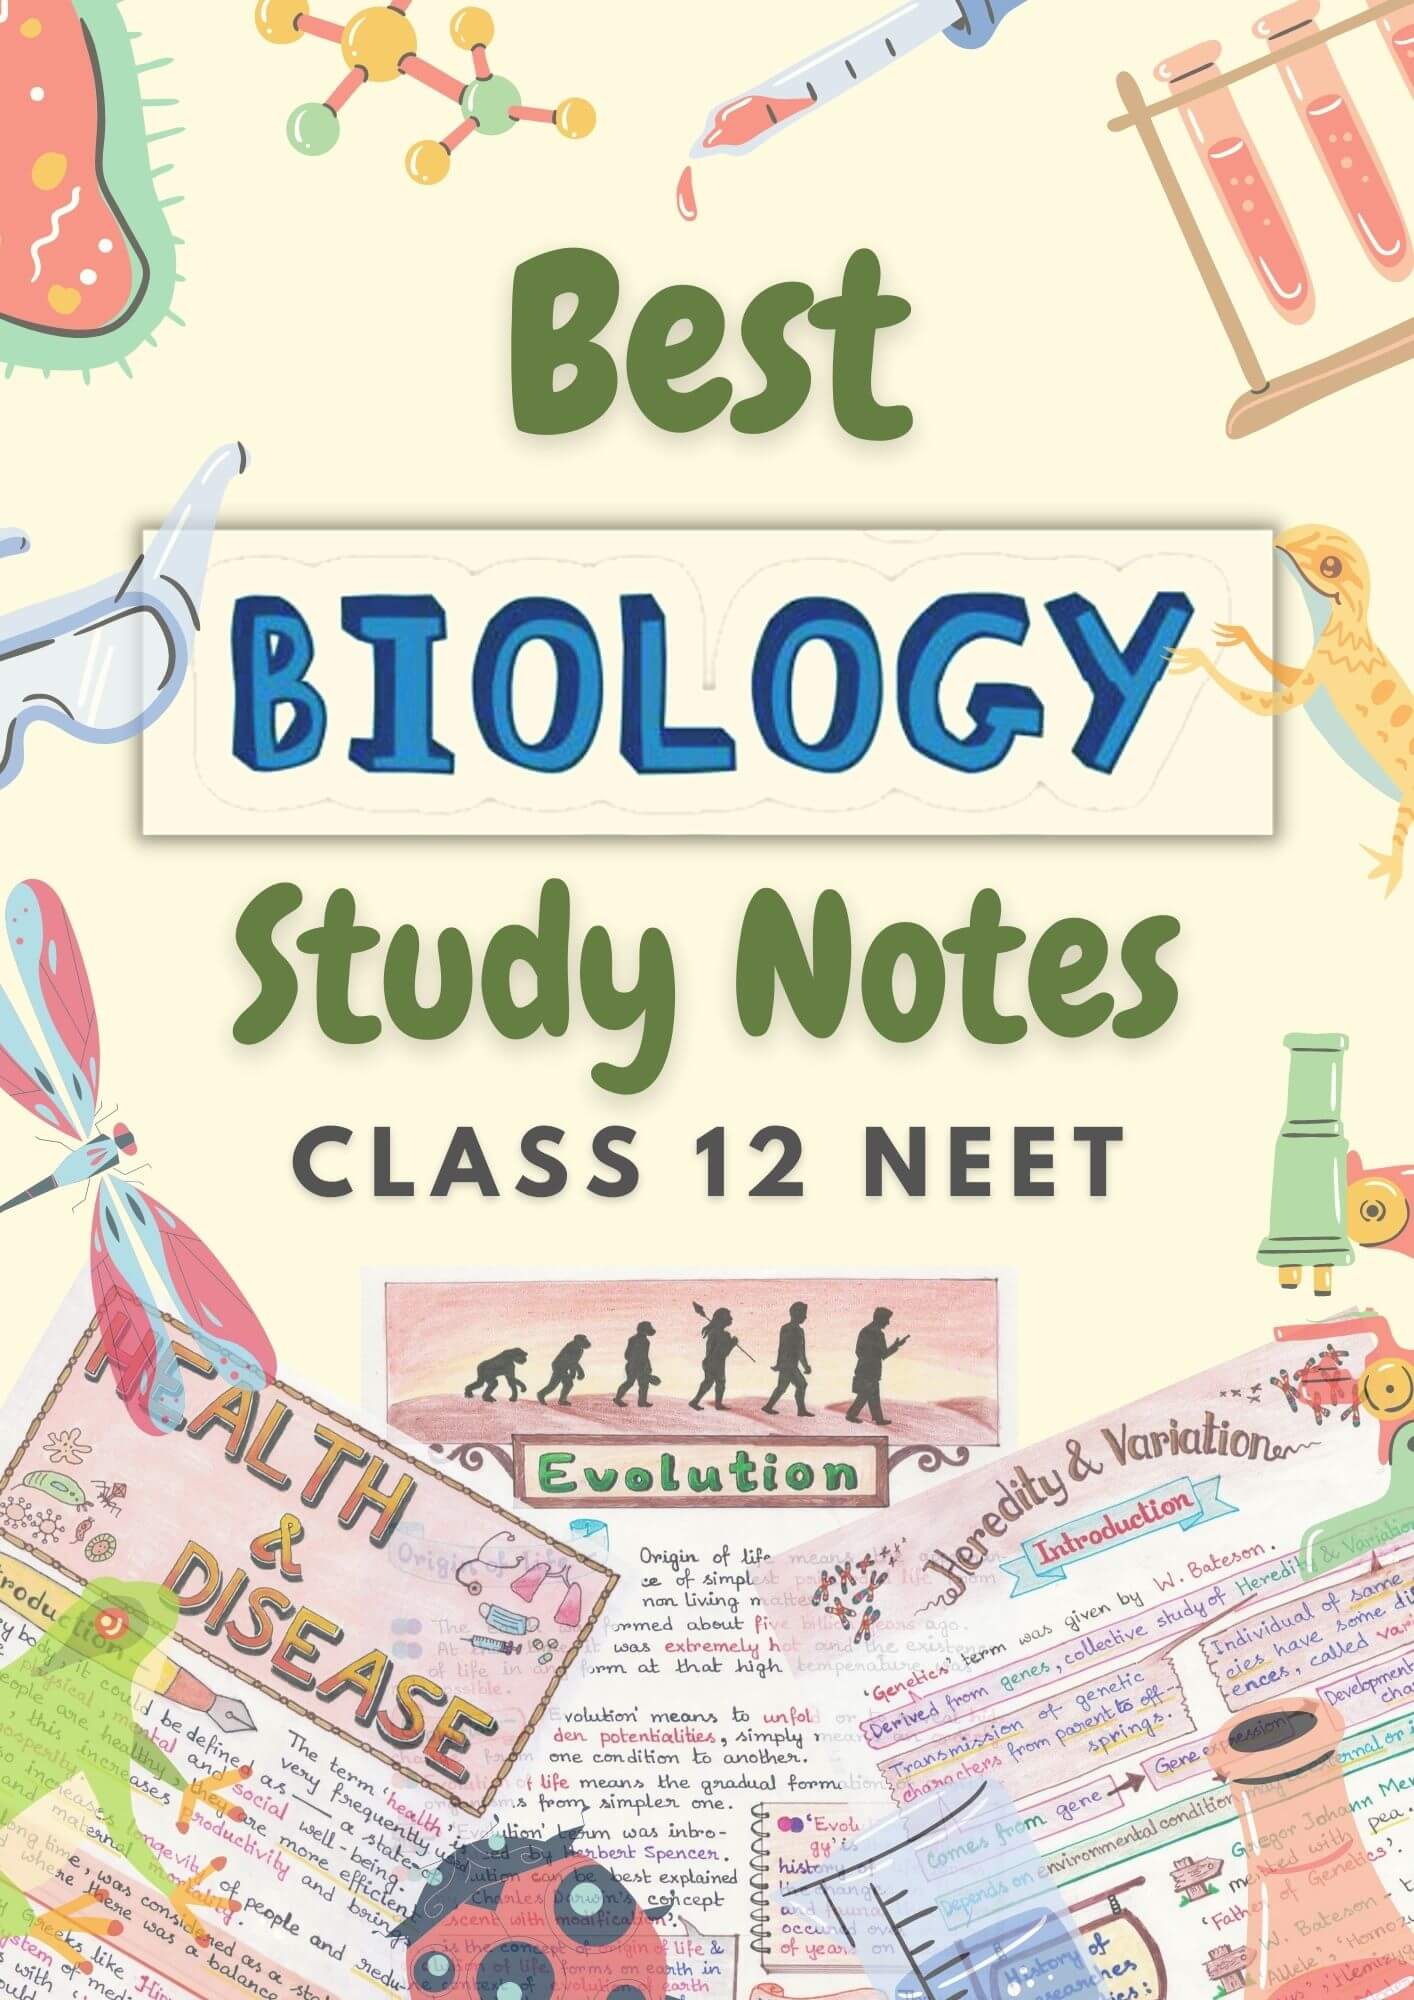 case study questions for class 12 biology